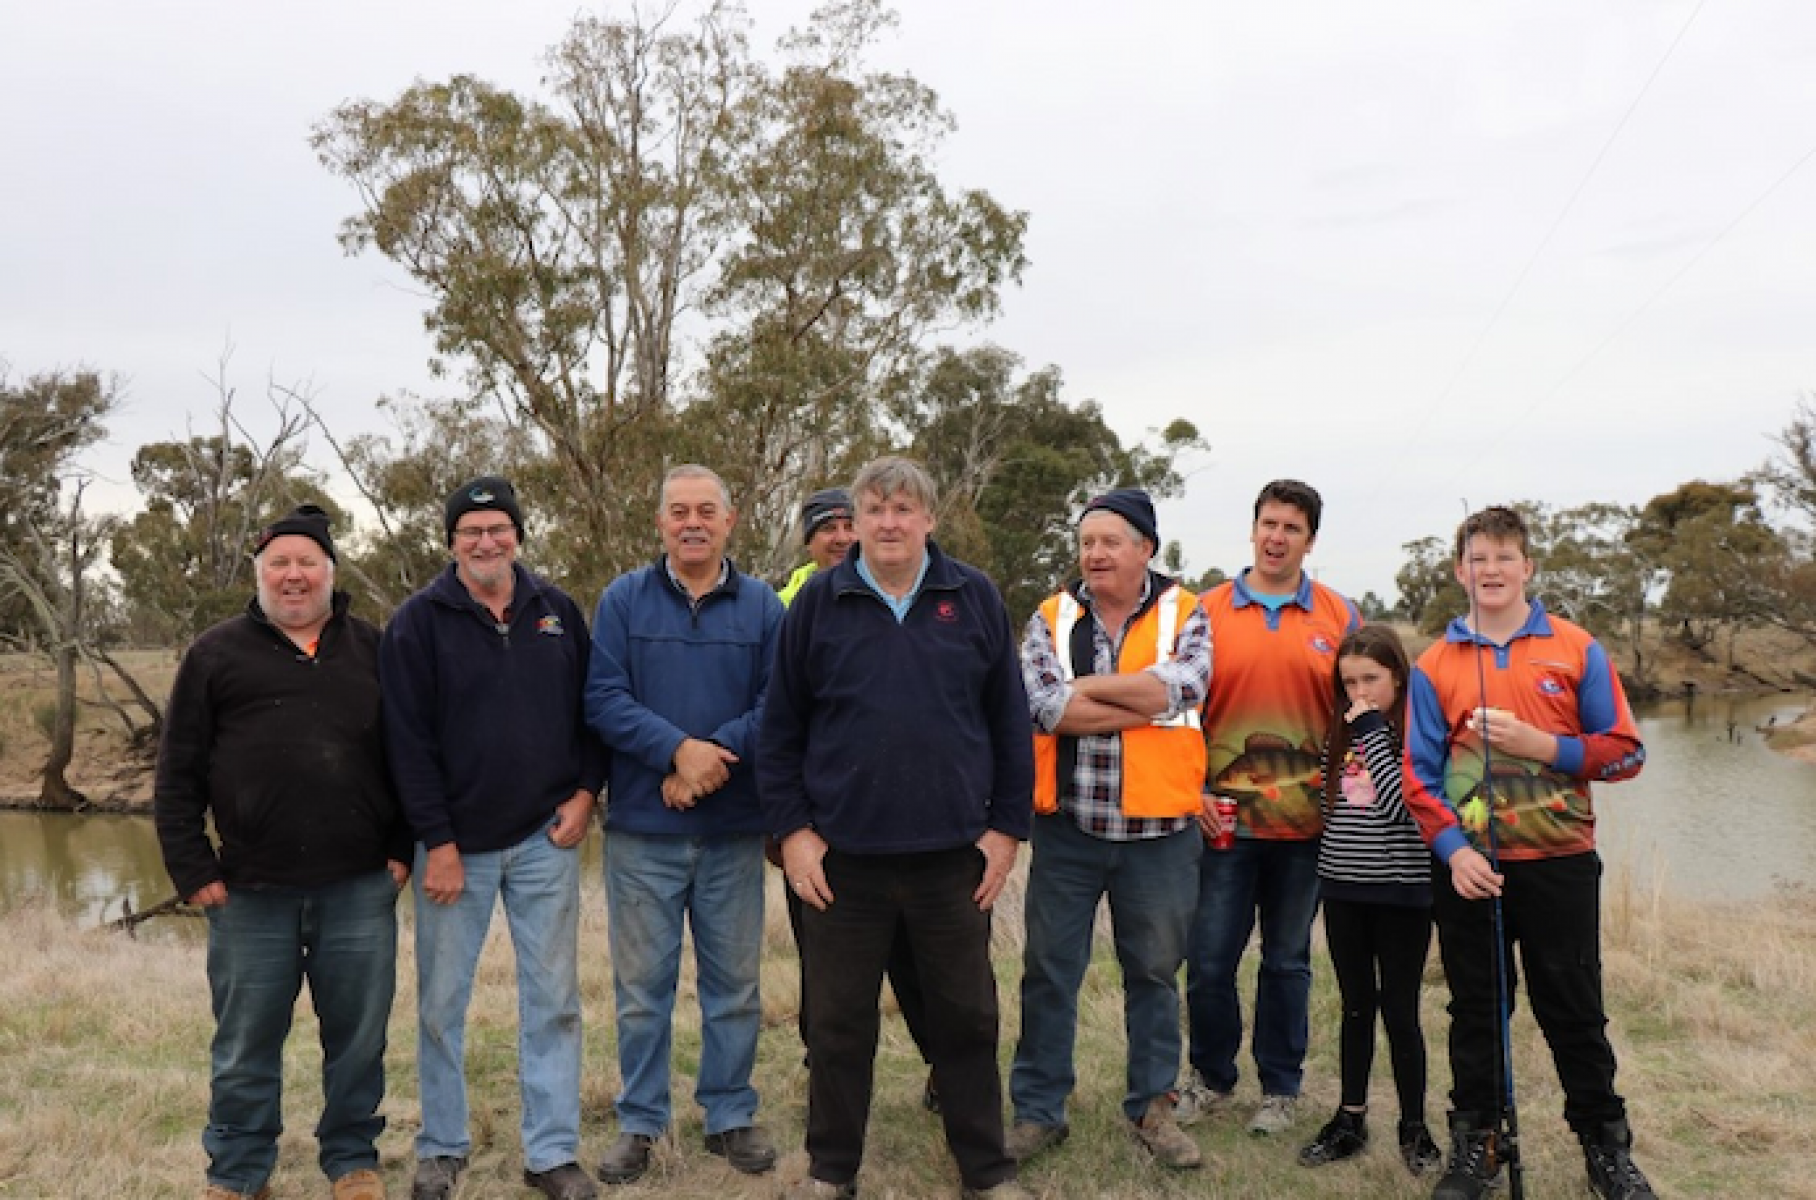 Group photo of 9 people from Horsham angling.